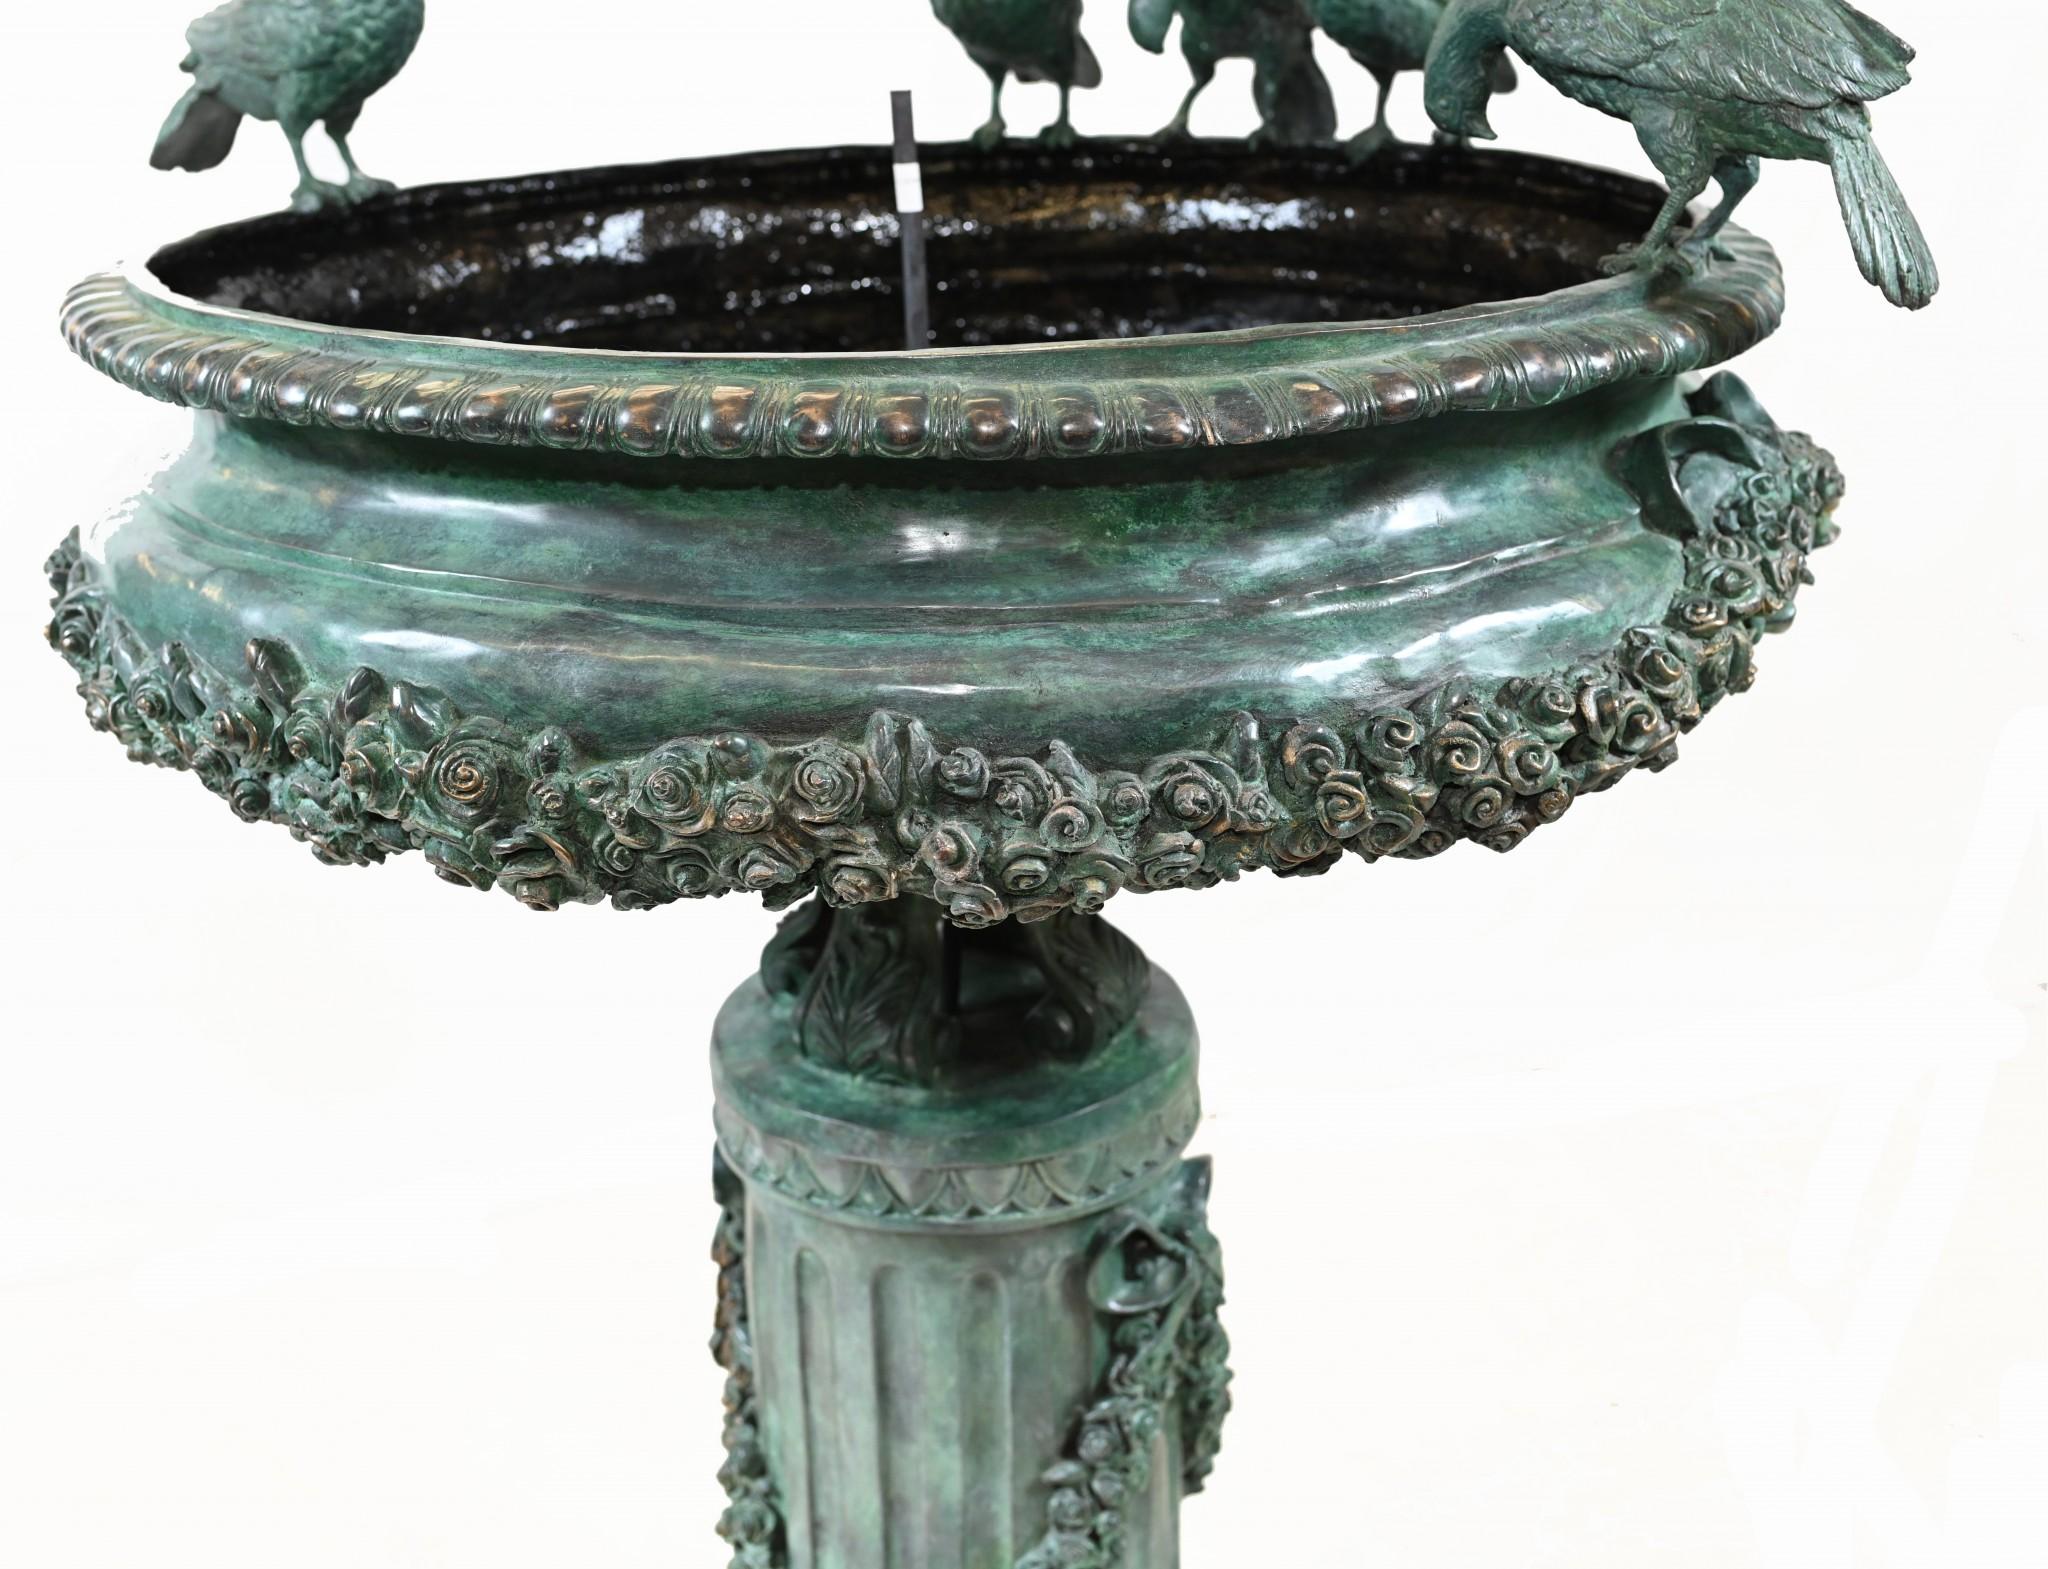 Stunning large Italian bronze water fountain
Classical look complemented by the gorgeous verdis gris patina
Love the birds depicted drinking from the rim of the main bowl
Classical drapes to the central column a further refined touch
Offered in